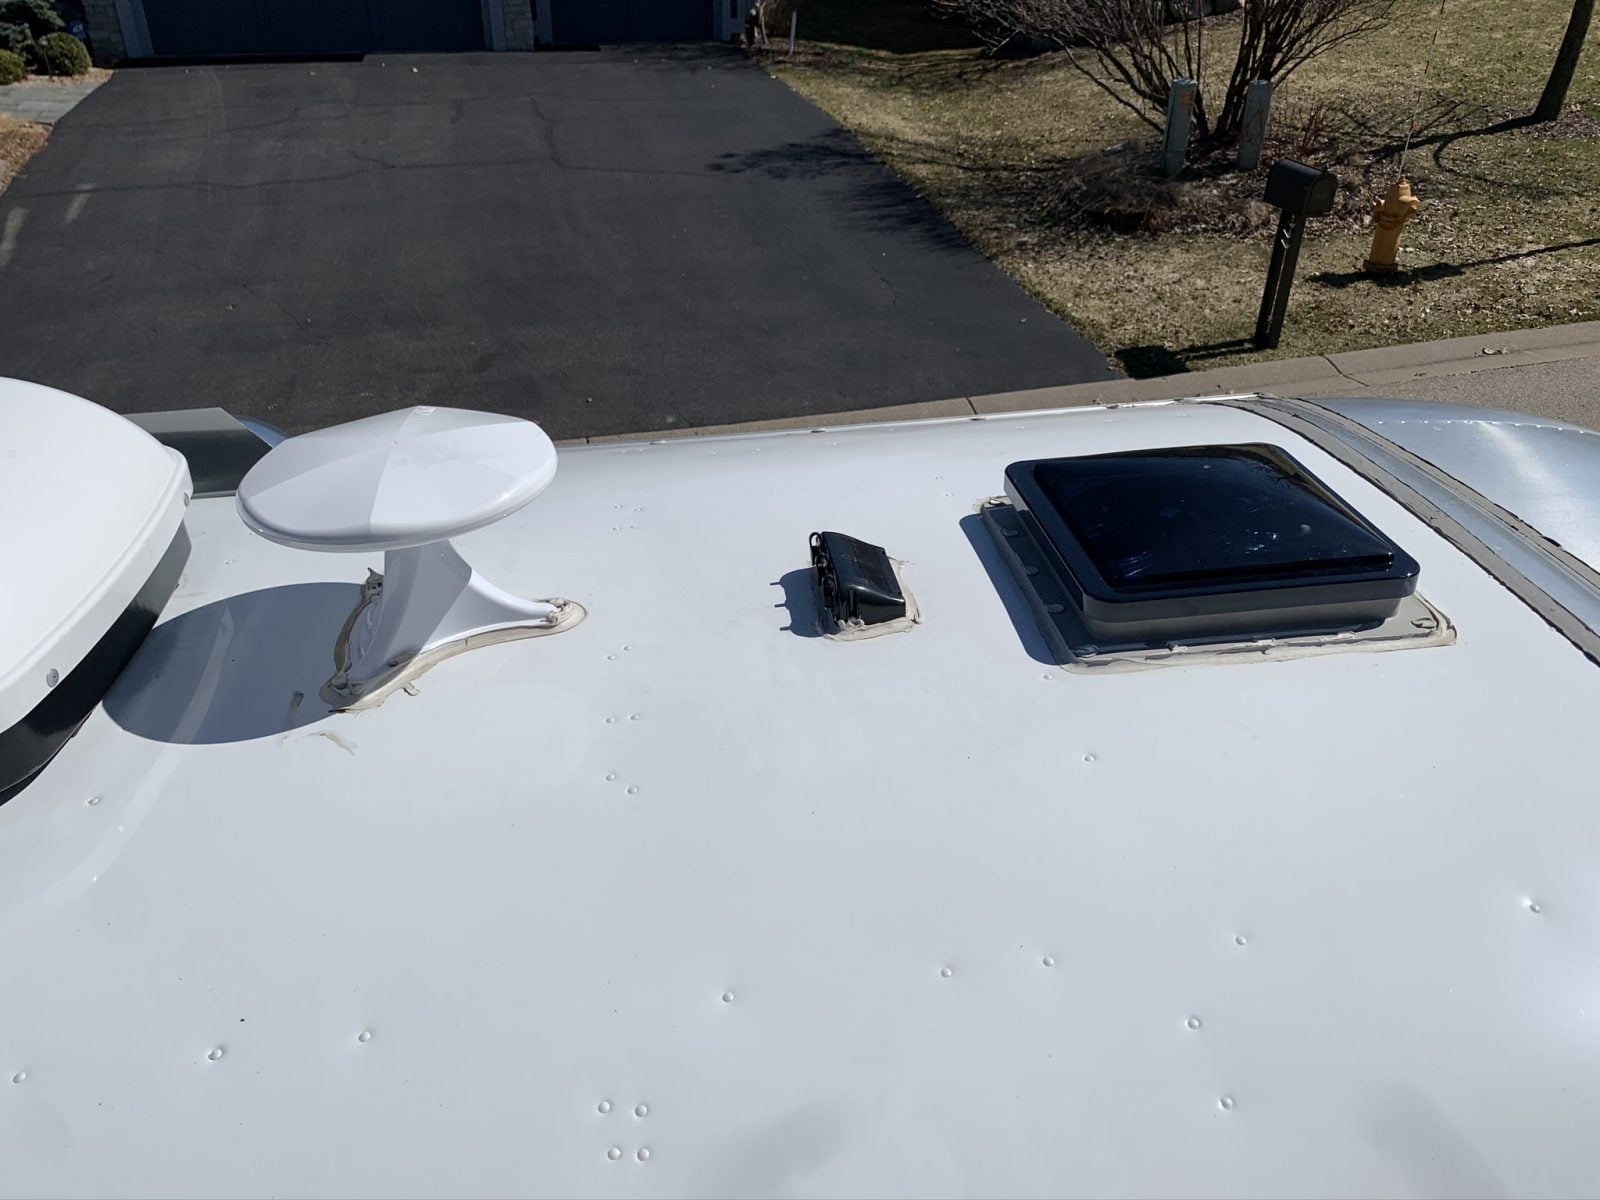 Airstream Globetrotter roof with Zamp solar prewire port pre-installed on roof.